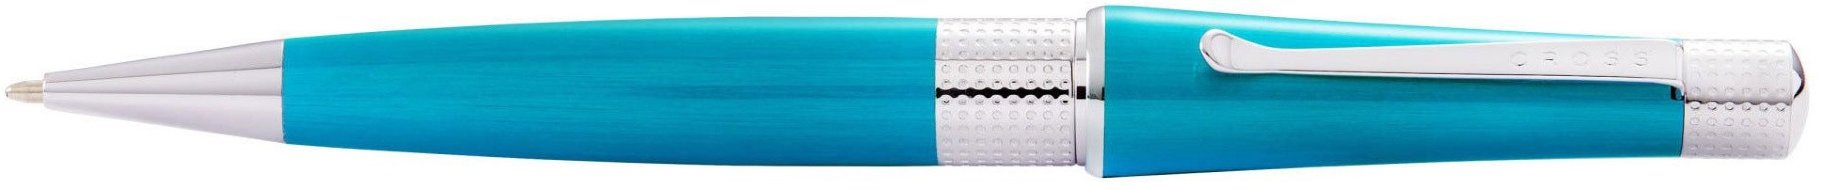 Шариковая ручка Cross Beverly Teal lacquer AT0492-28